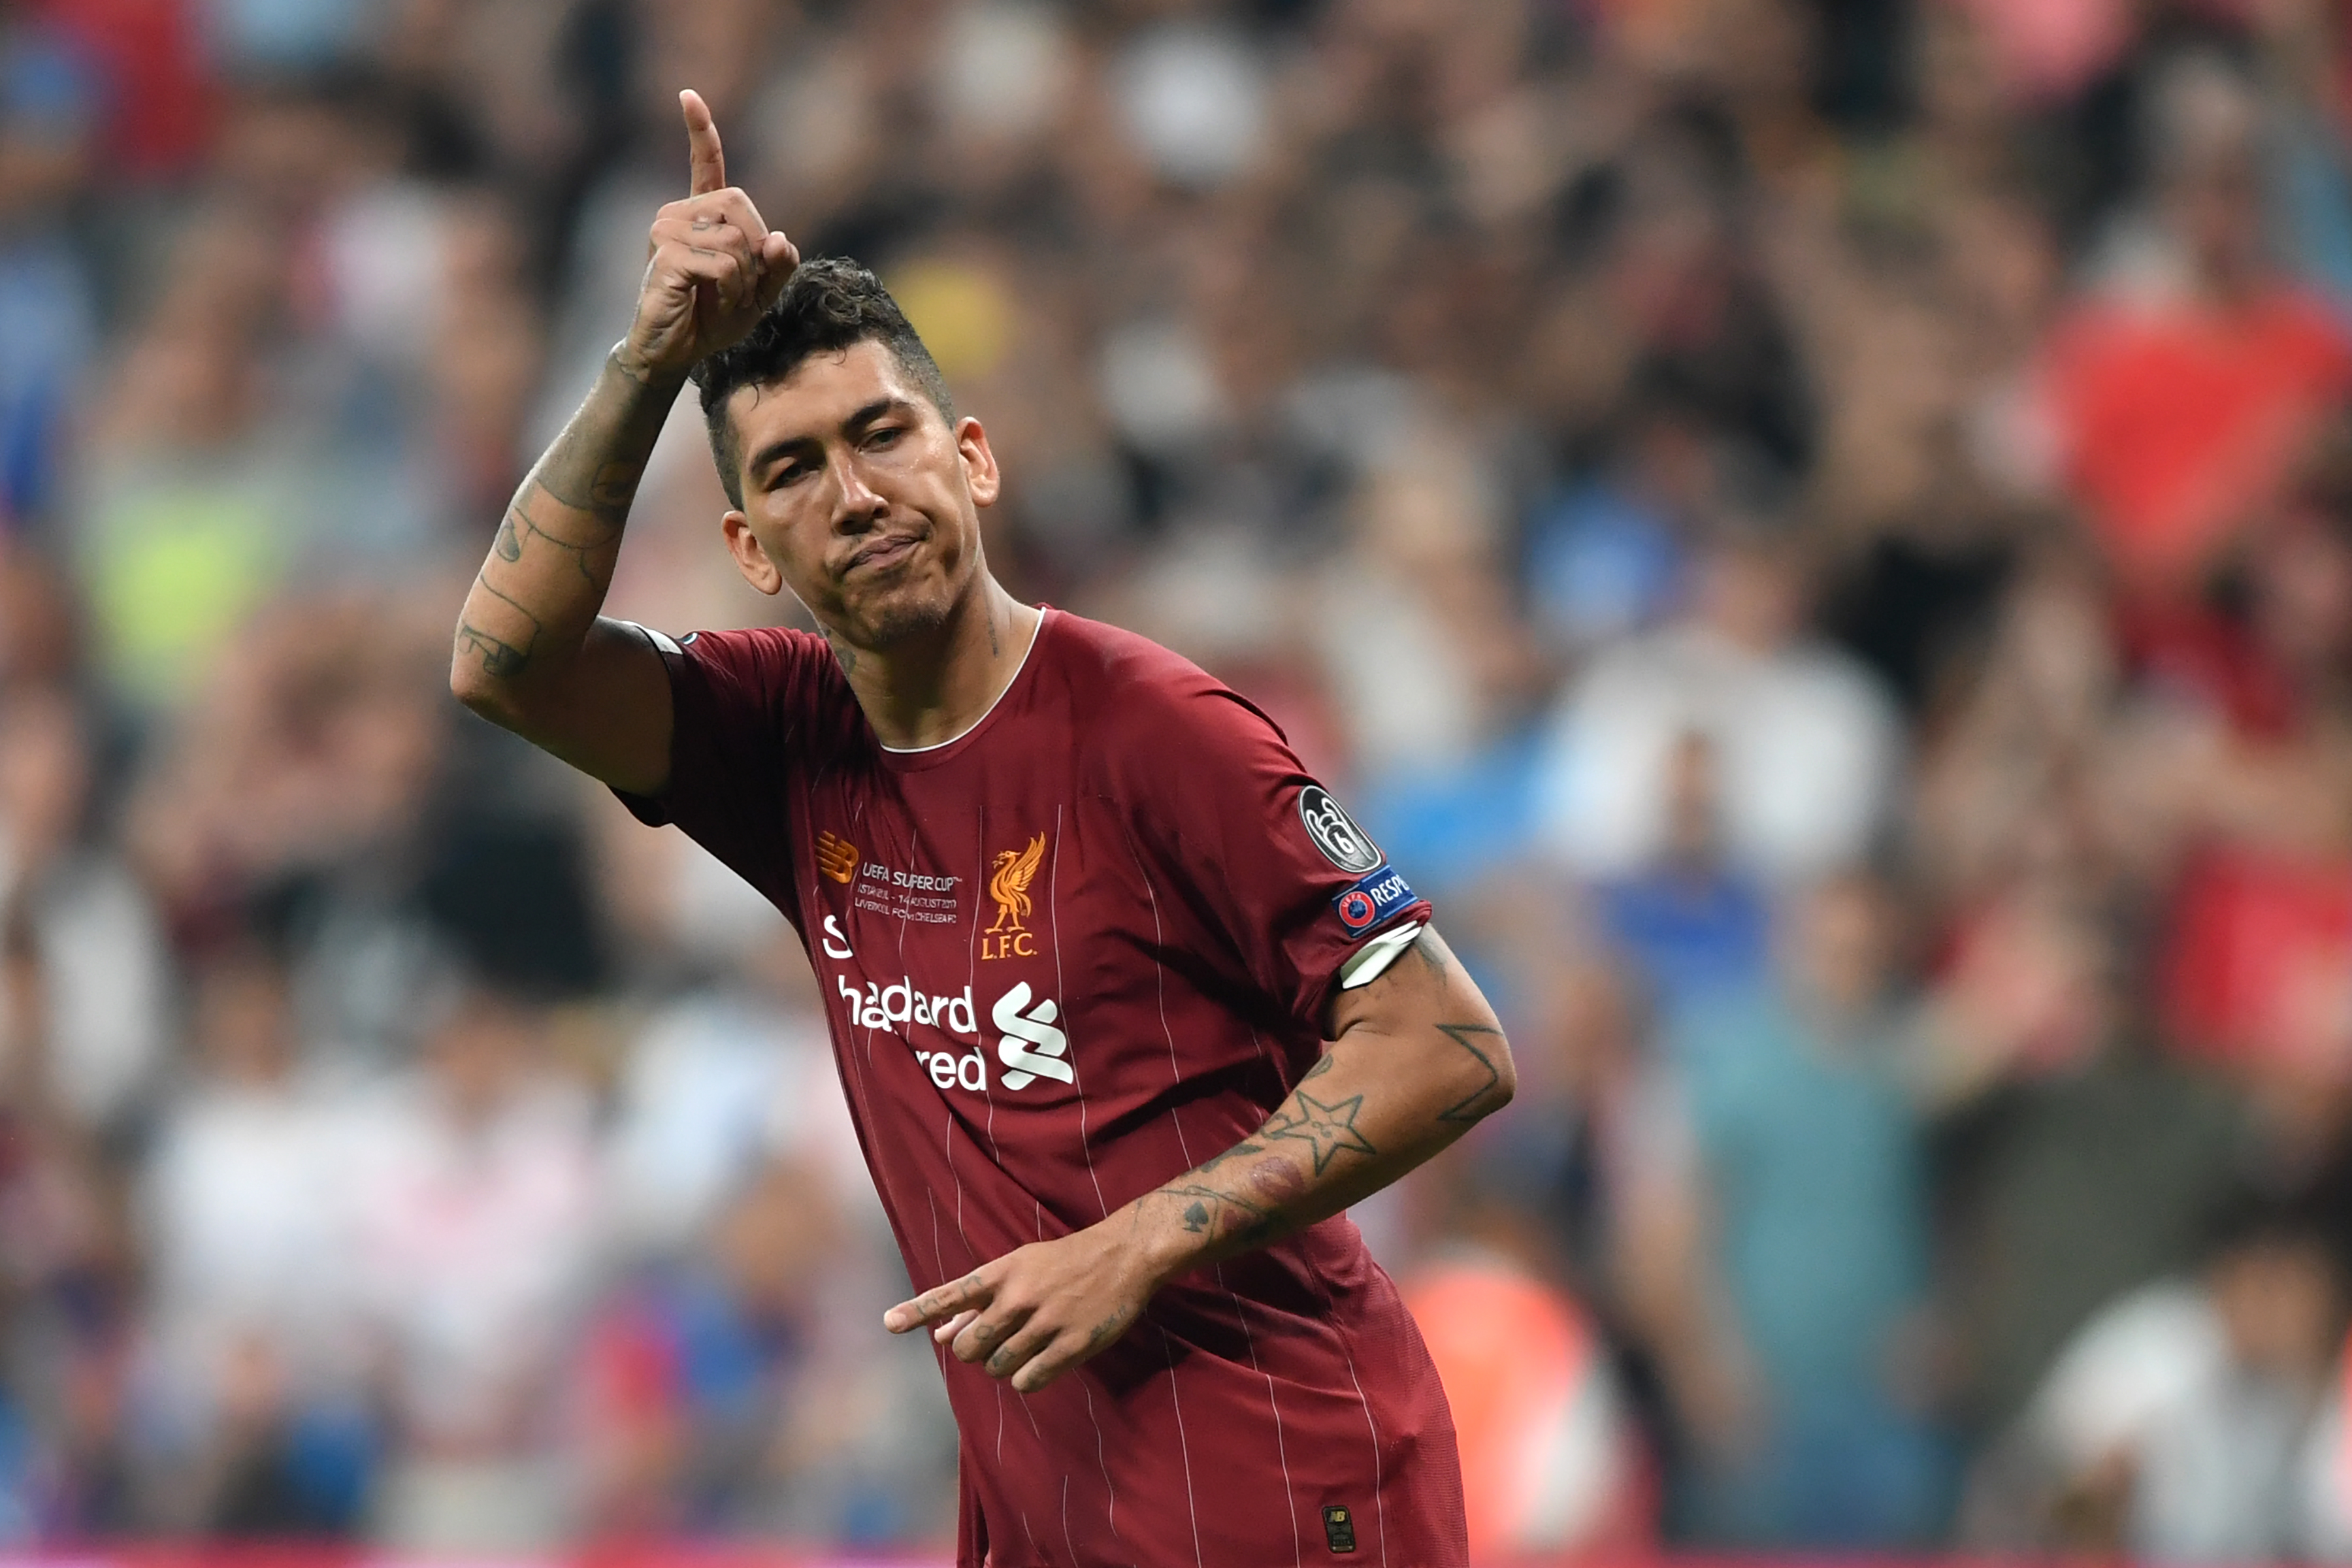 Roberto Firmino won the Club World Cup for Liverpool in 2019. (Photo by Ozan Kose/AFP/Getty Images)